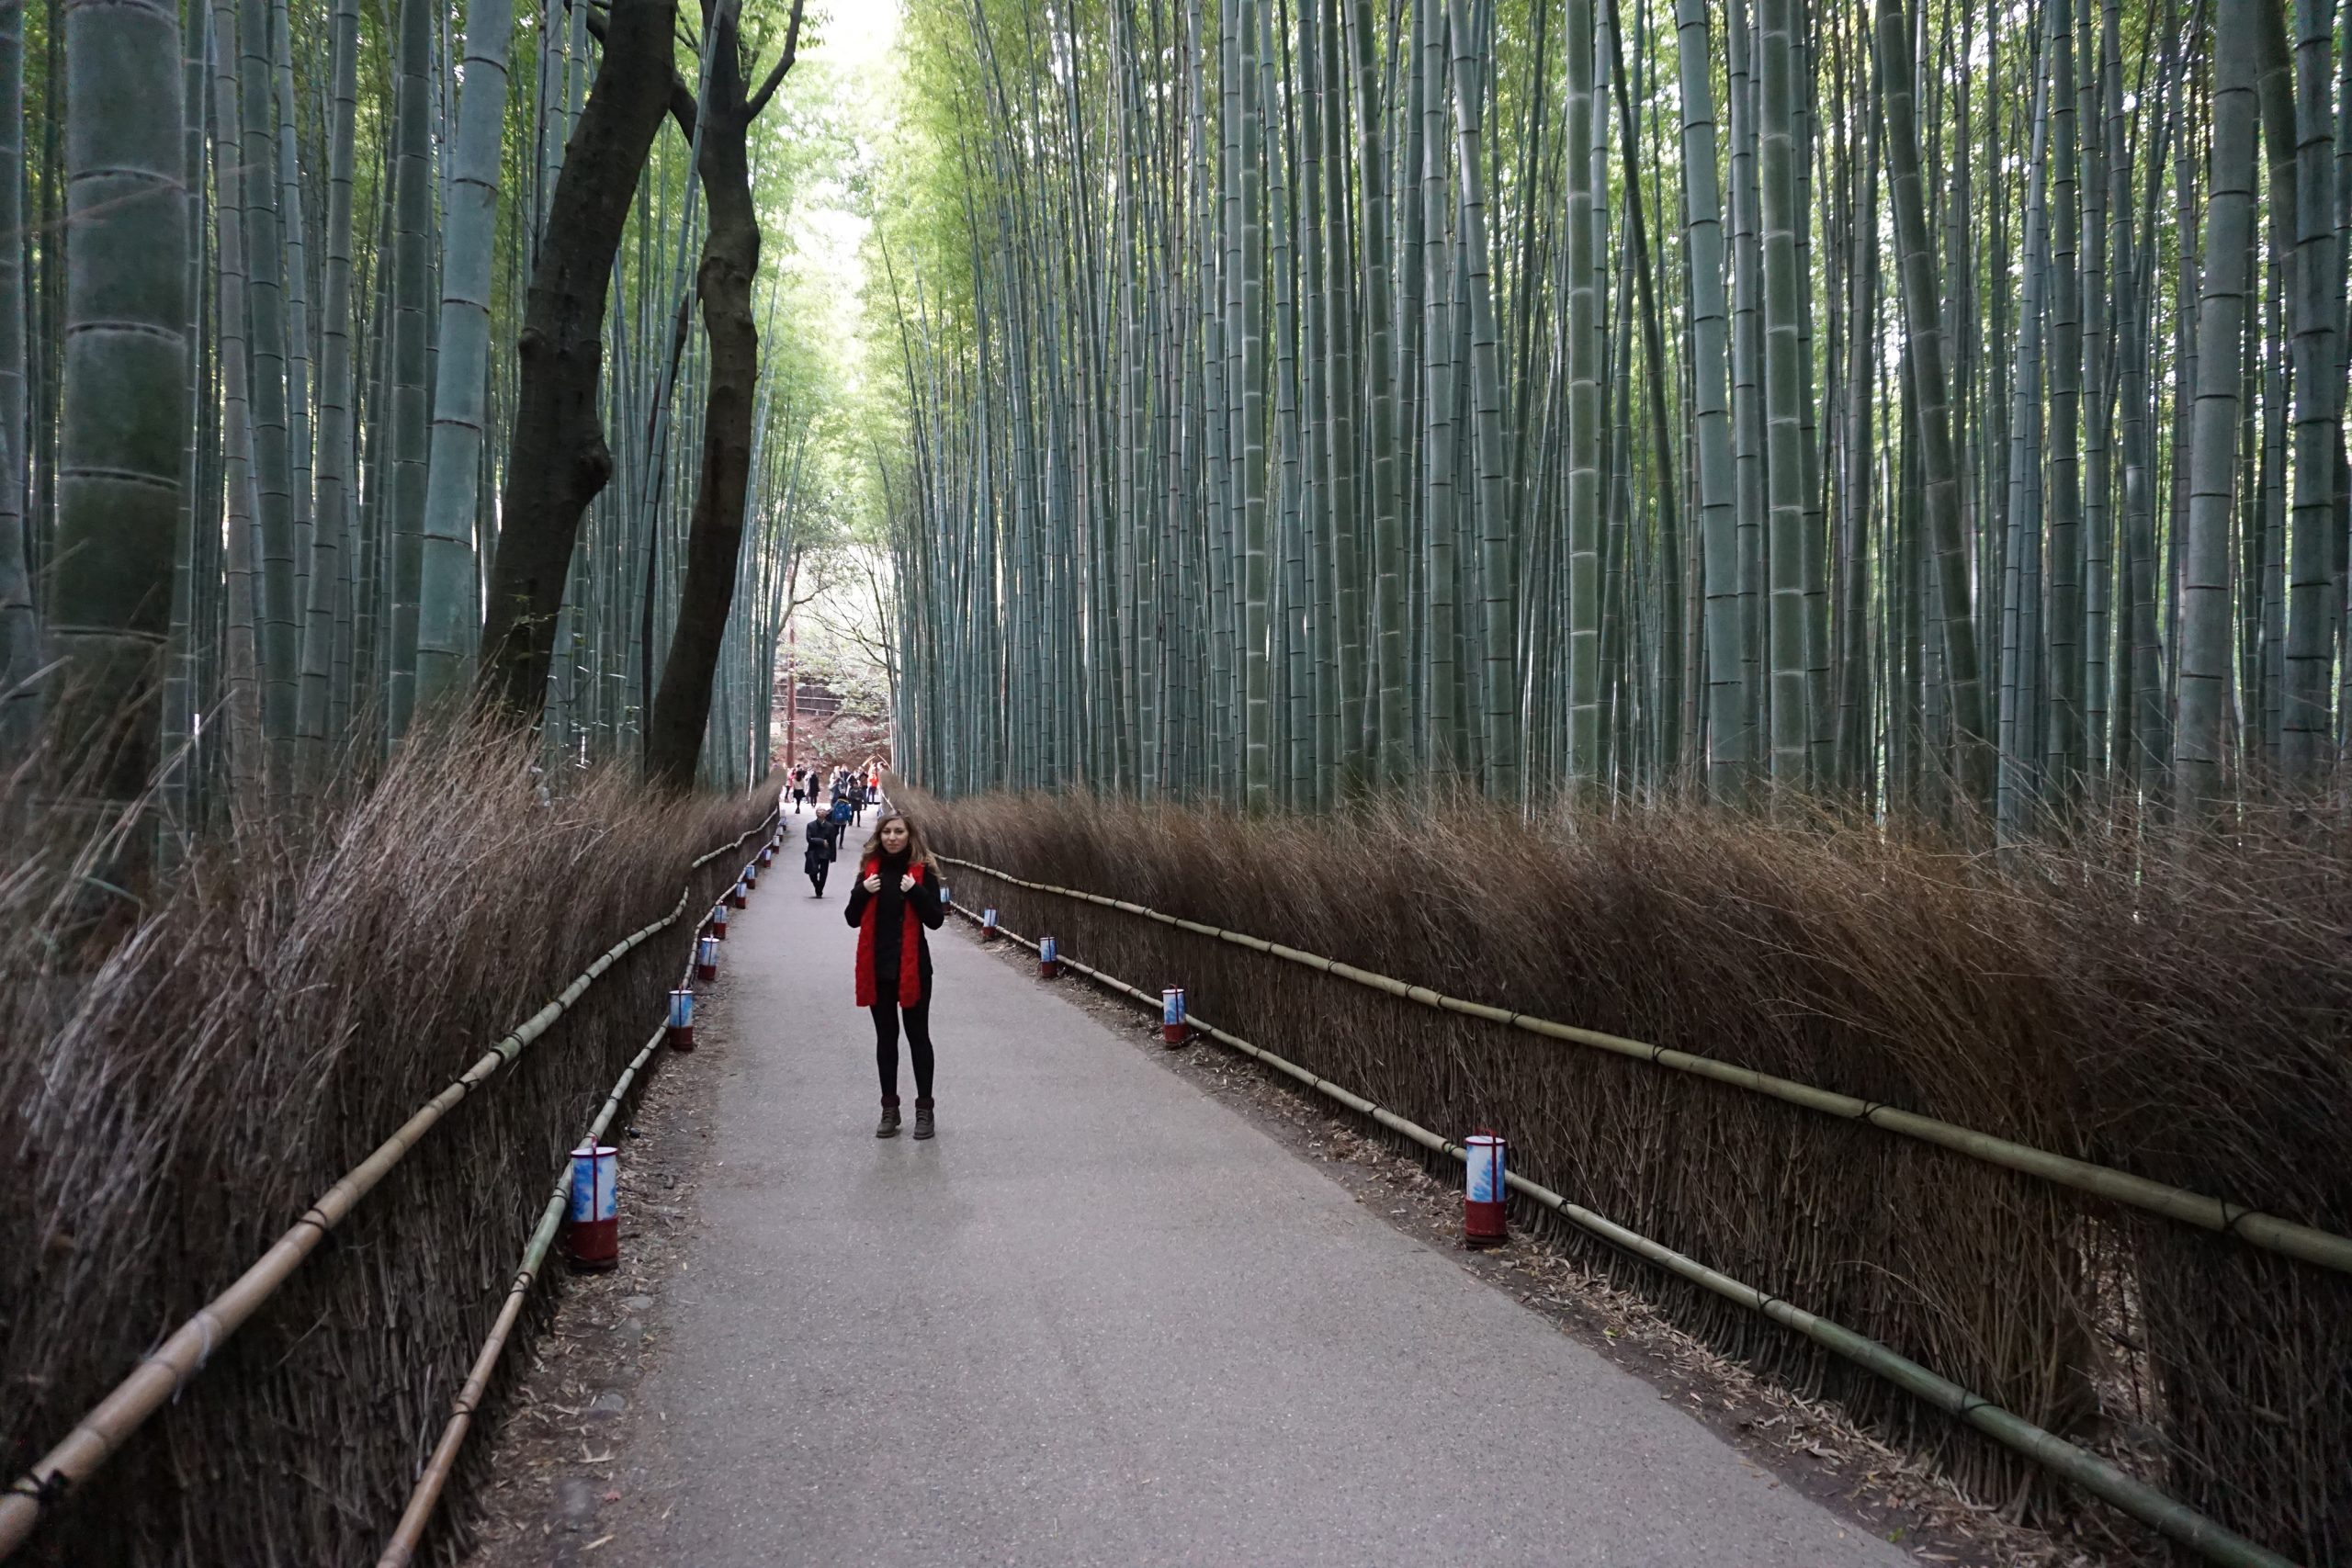 Cory from You Could Travel visiting Arashiyama Bamboo Forest in Kyoto